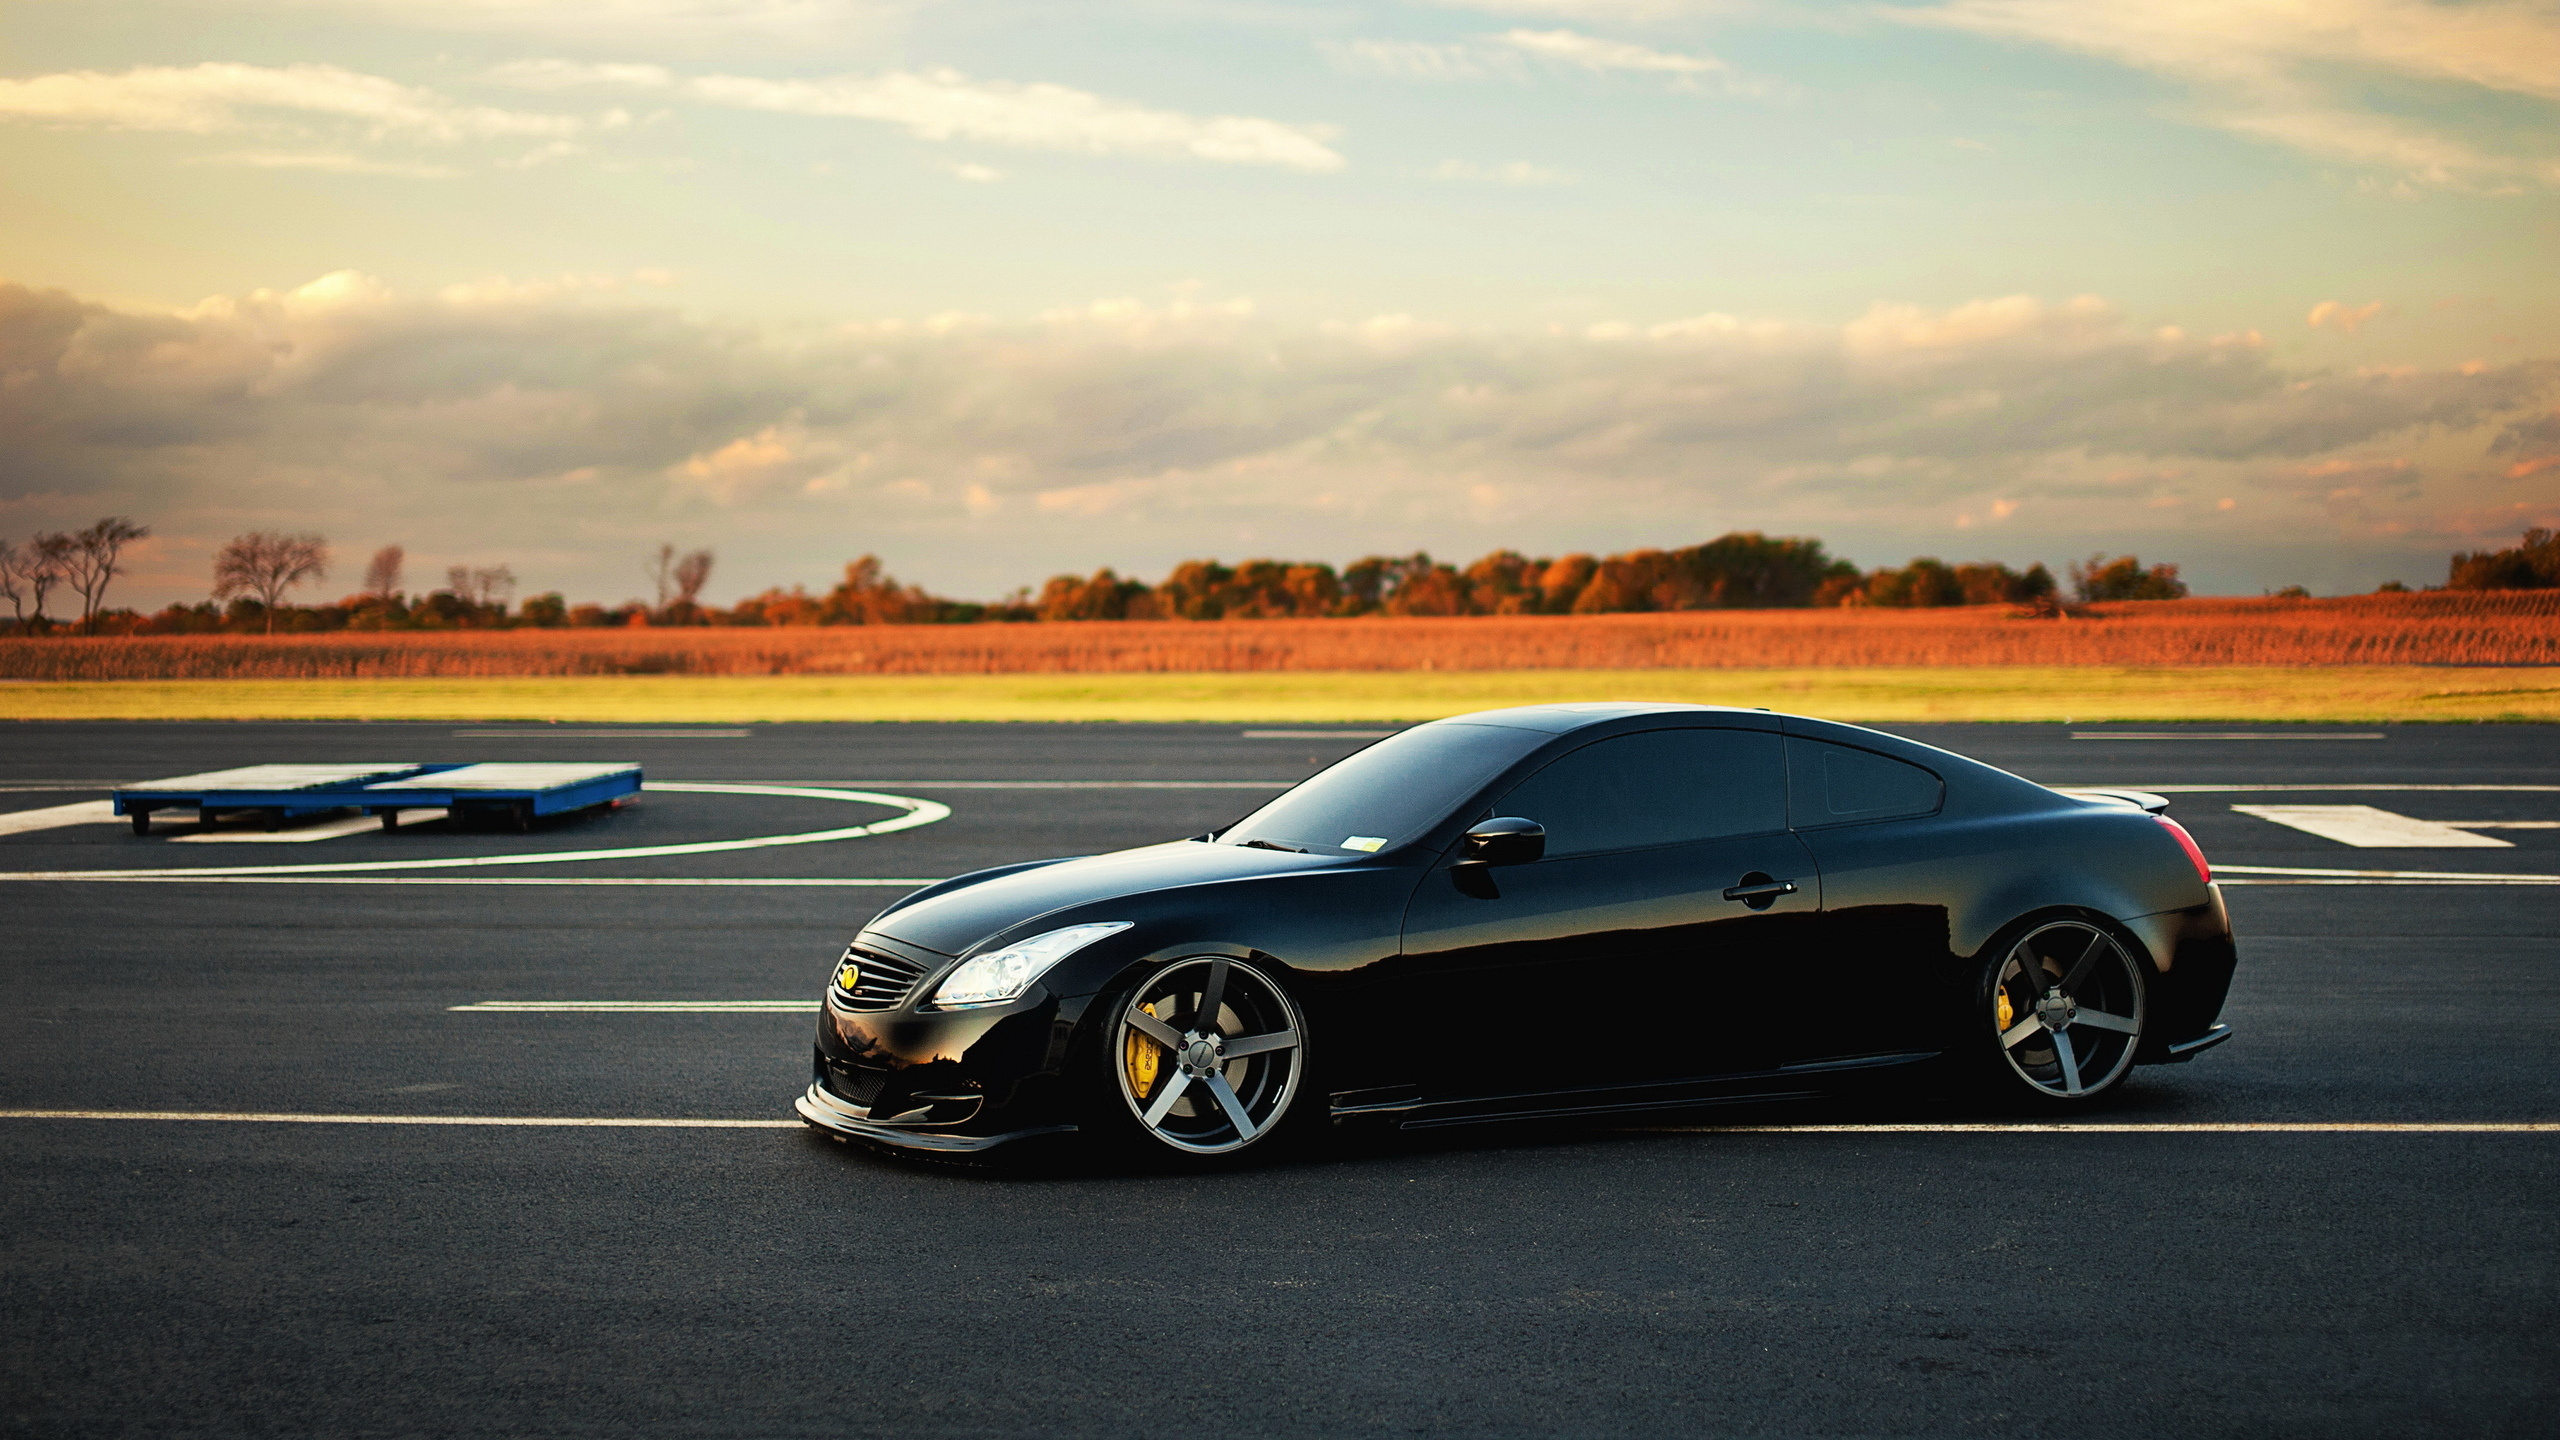 Black Coupe on Gray Asphalt Road During Daytime. Wallpaper in 2560x1440 Resolution